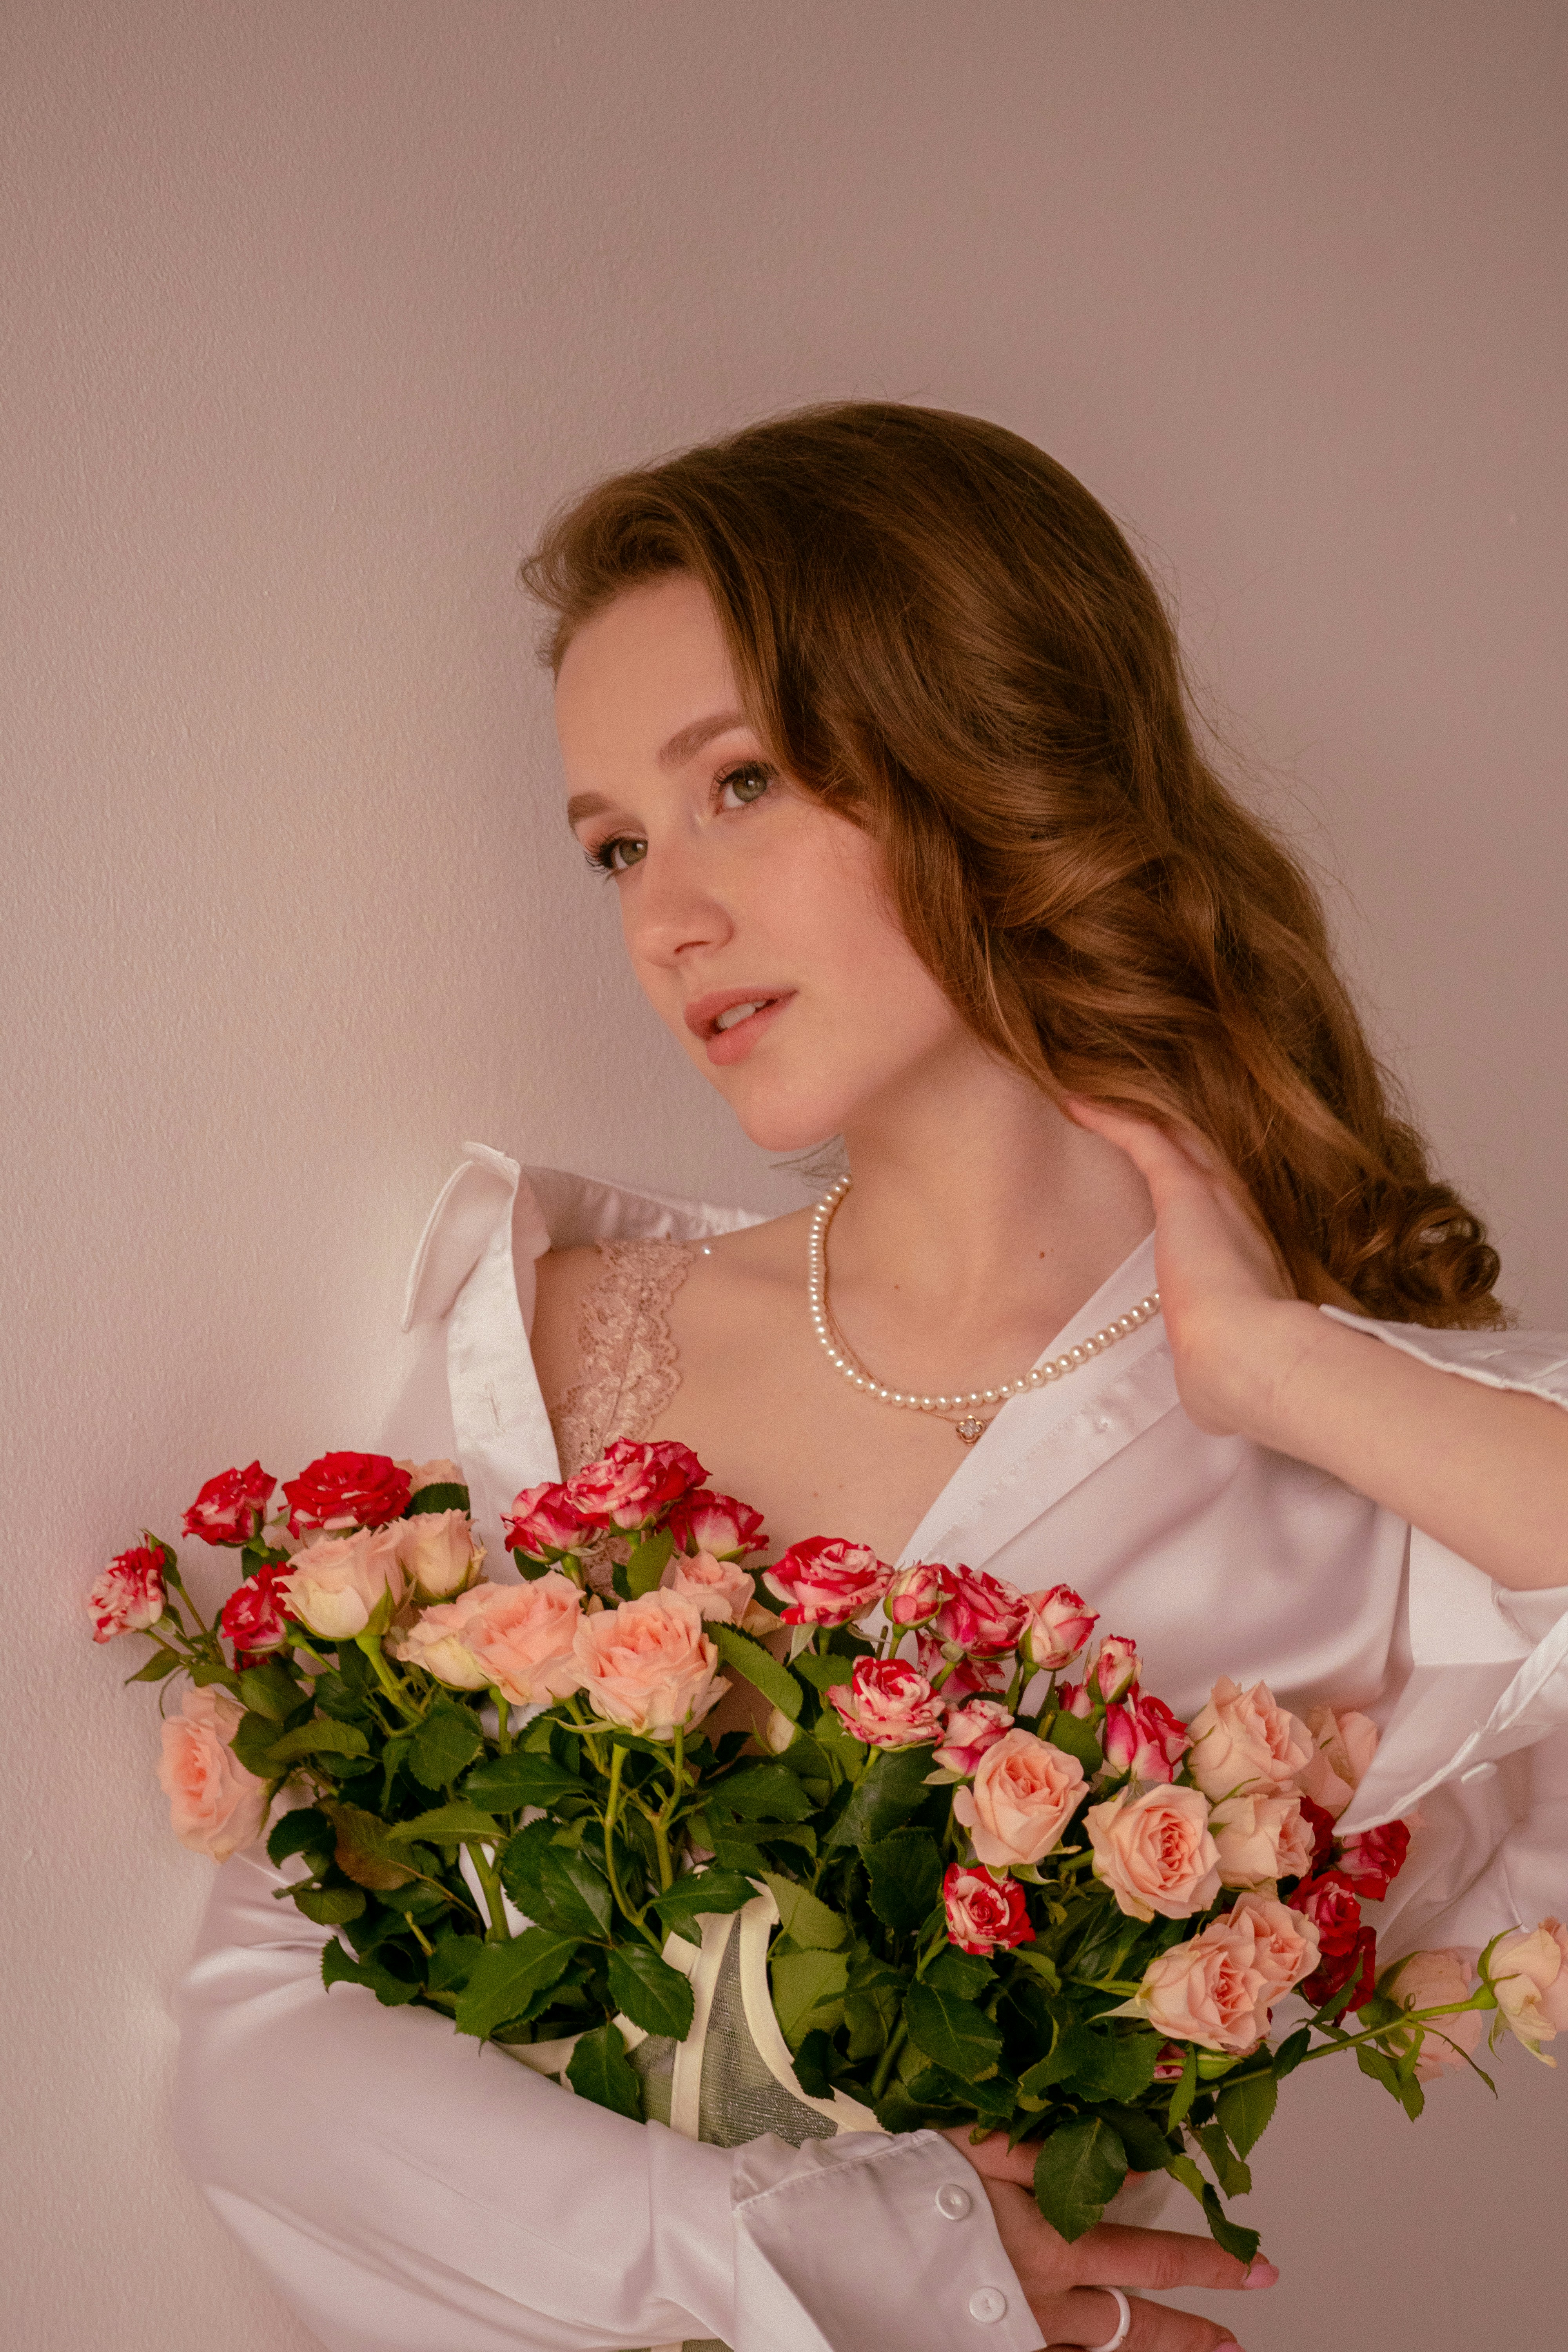 A tender girl in a white shirt in a corset with a bouquet of roses, with a make-up with pearls and a pearl necklace